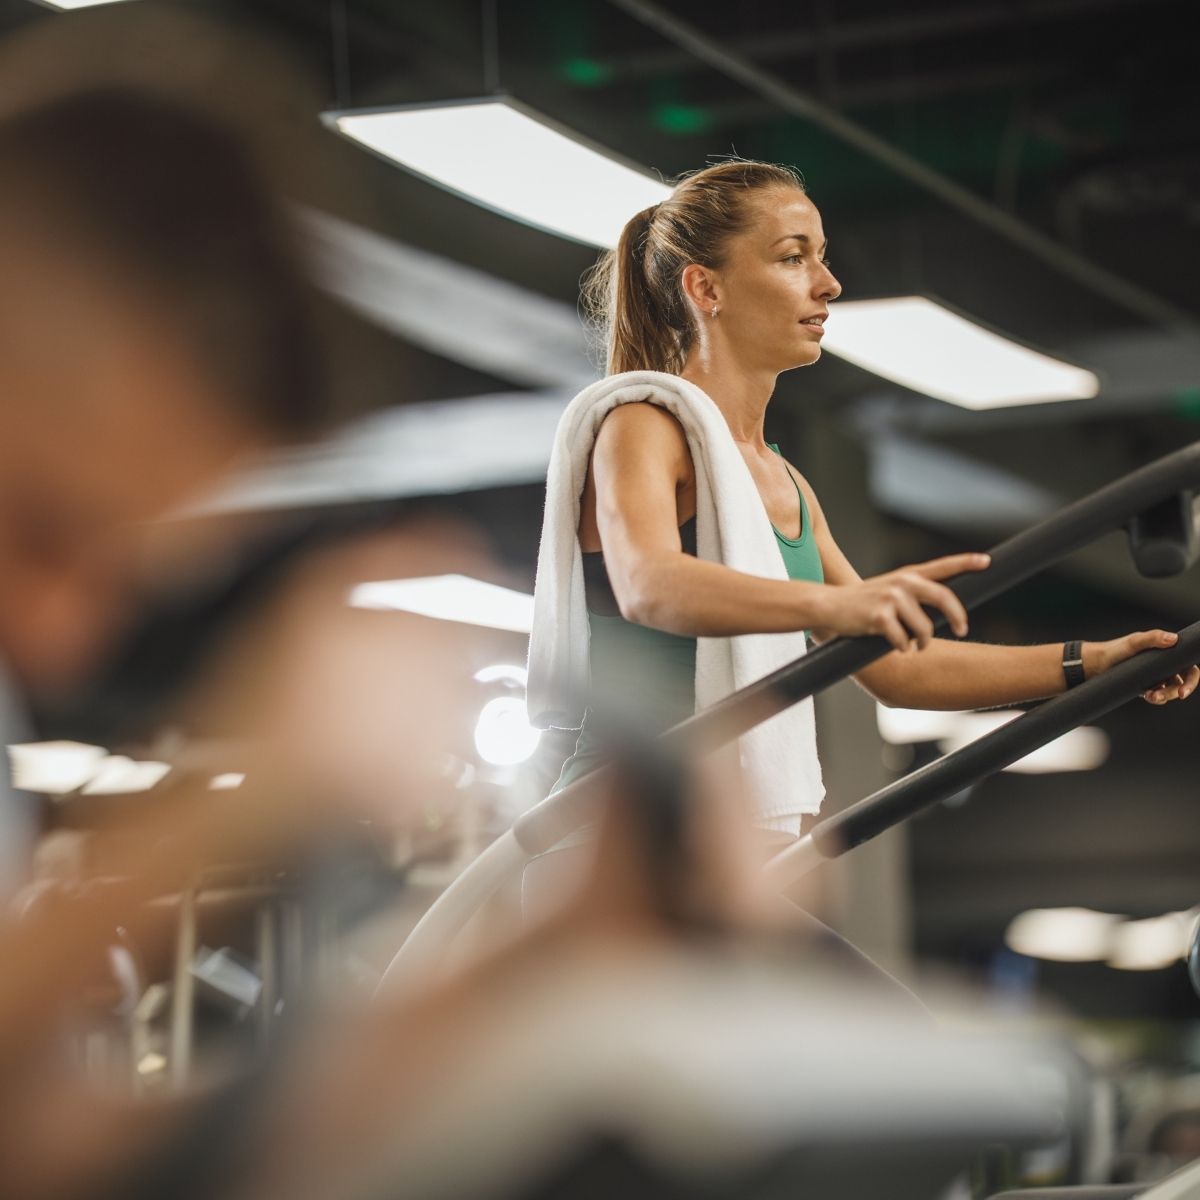 Walk or run the stairmaster and reap the benefits